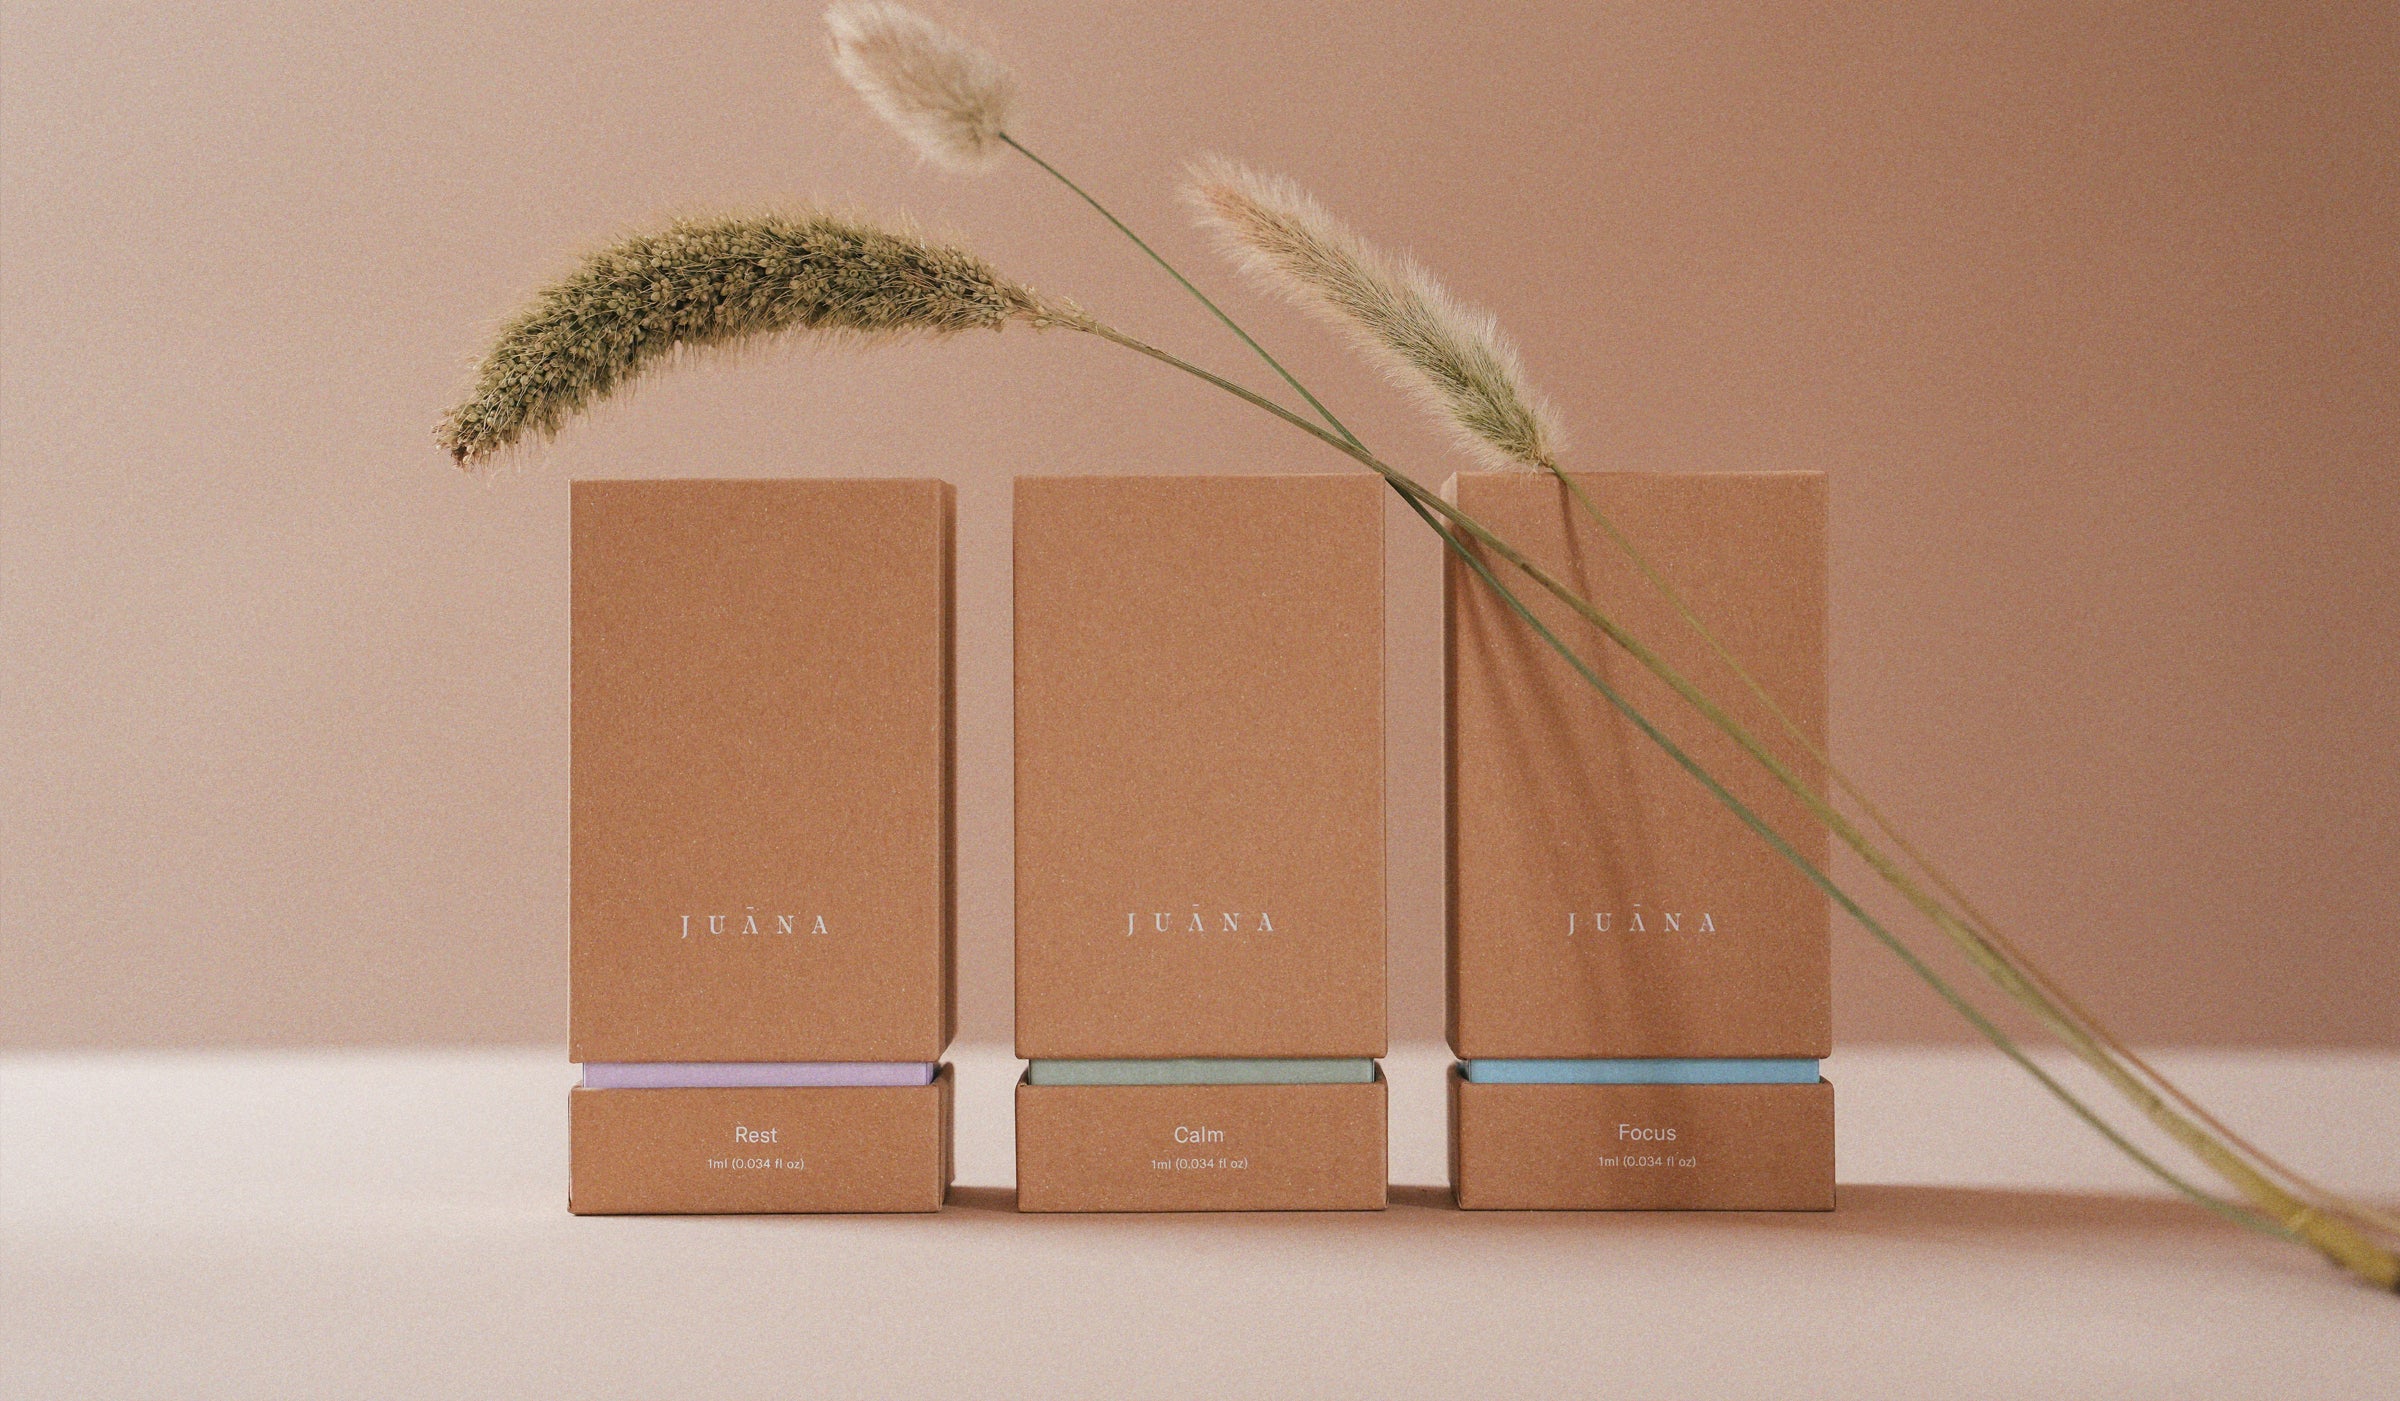 Sustainable elegance: A collection of Juāna cannabis brand products showcased with eco-friendly packaging, embodying a commitment to sustainability.